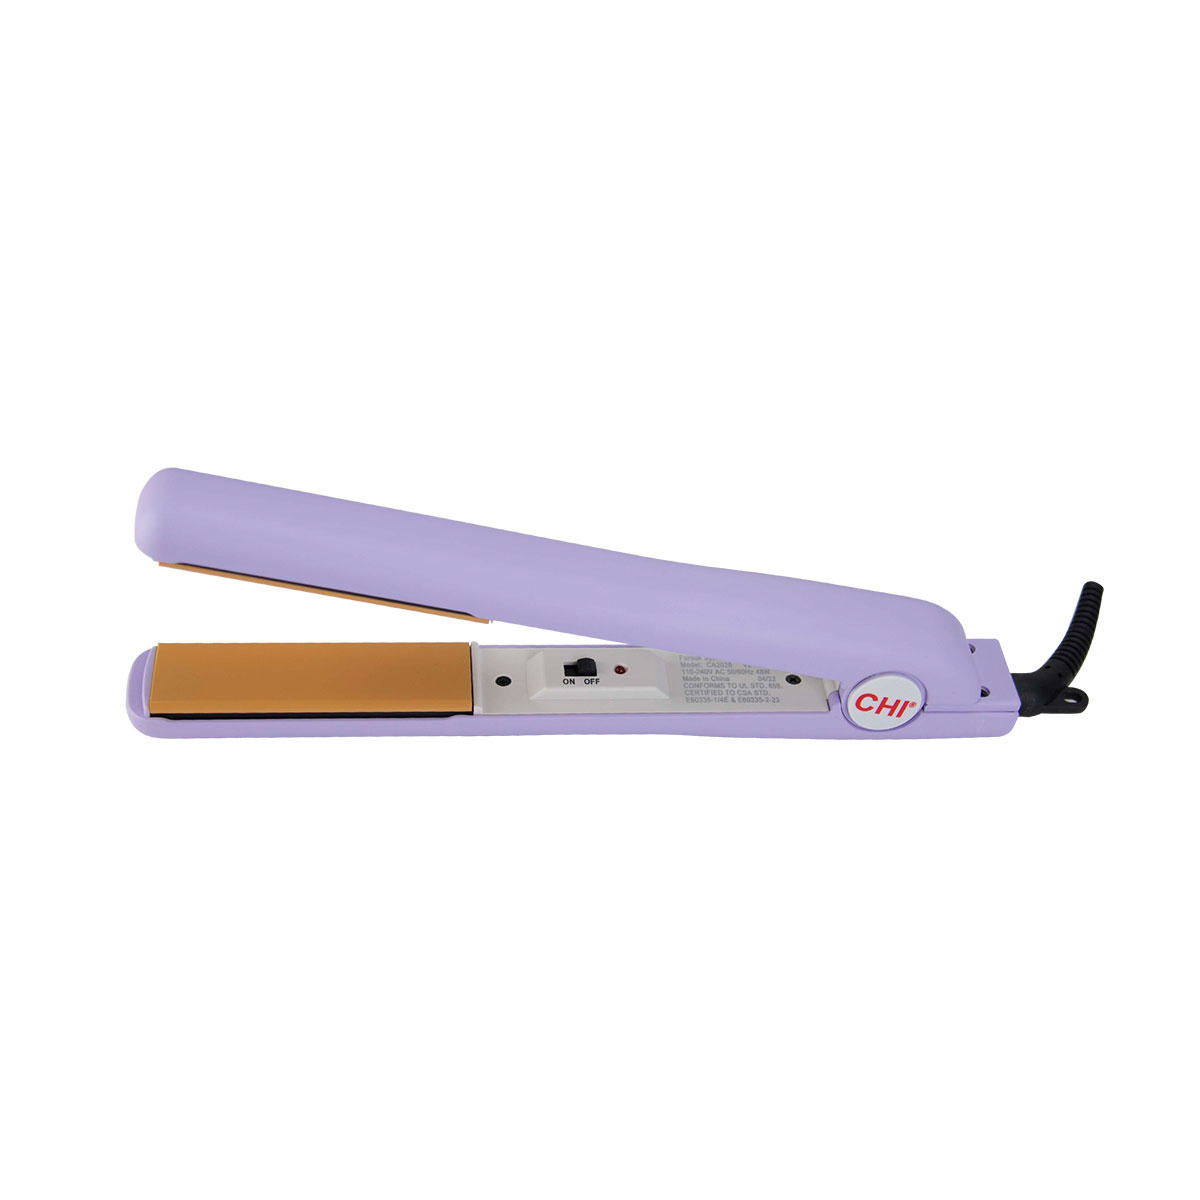 CHI Tourmaline Ceramic Hairstyling Iron | Beauty Care Choices